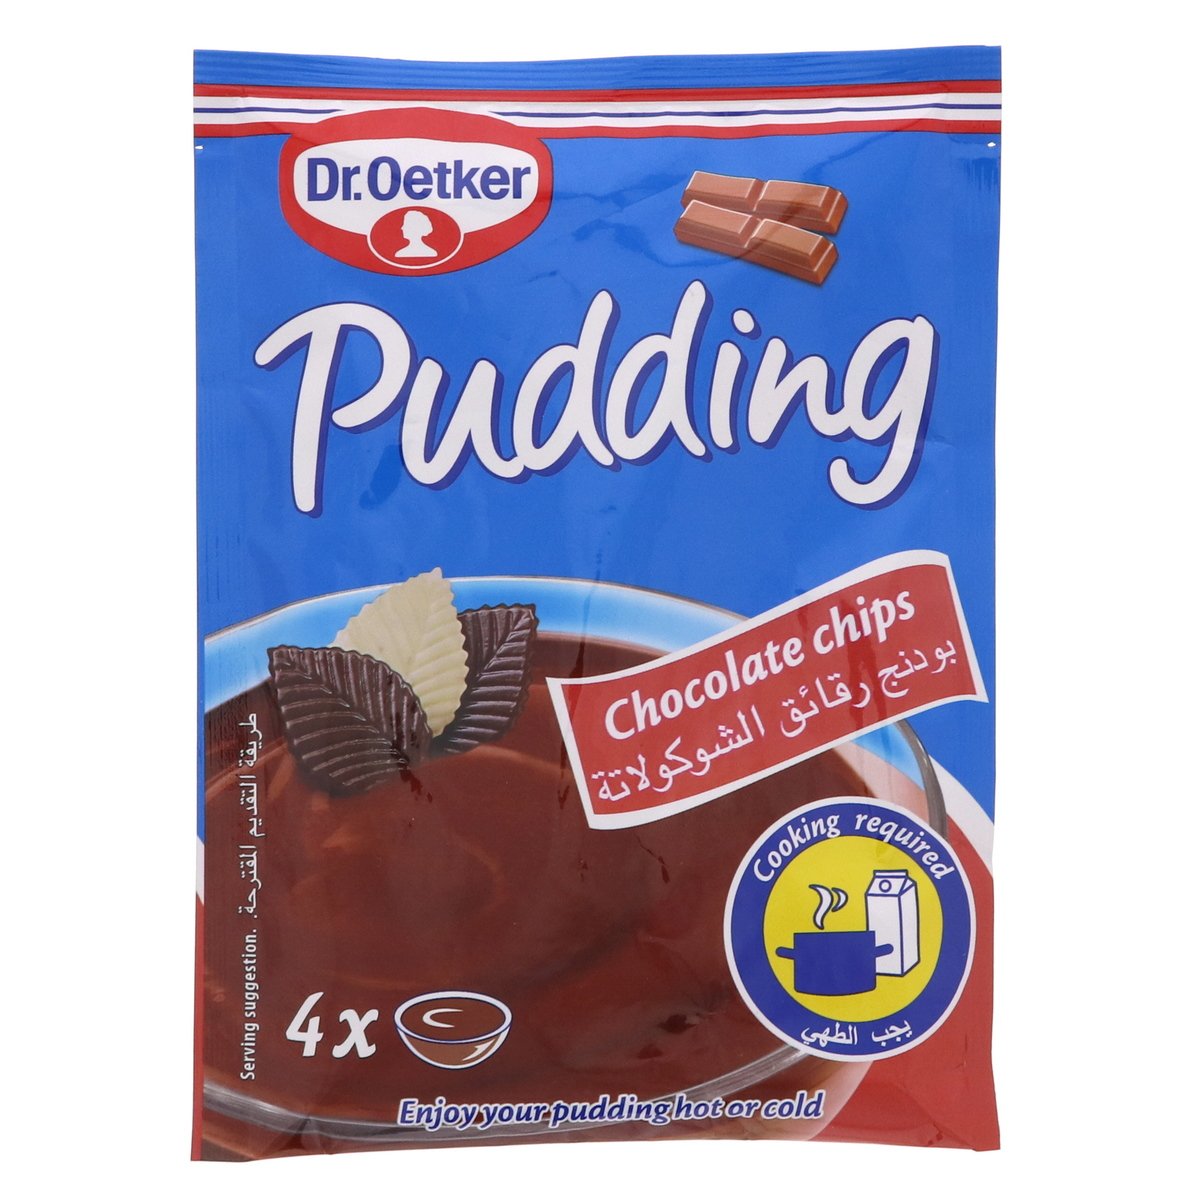 Dr. Oetker Pudding Chocolate Chips 115g